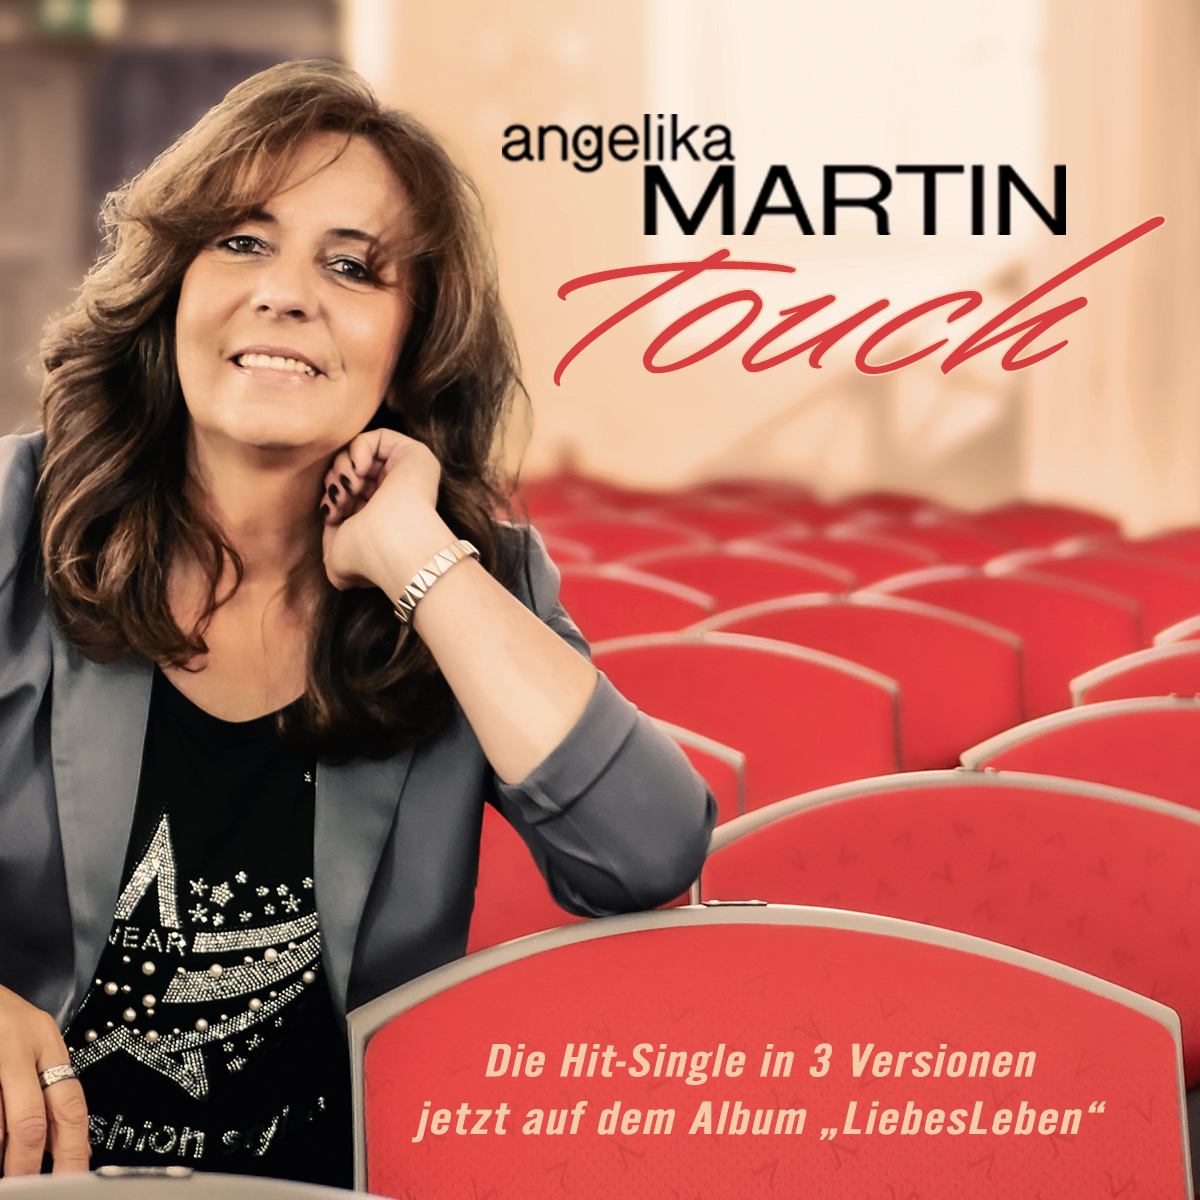 ANGELIKA MARTIN * Touch (Download-Track)